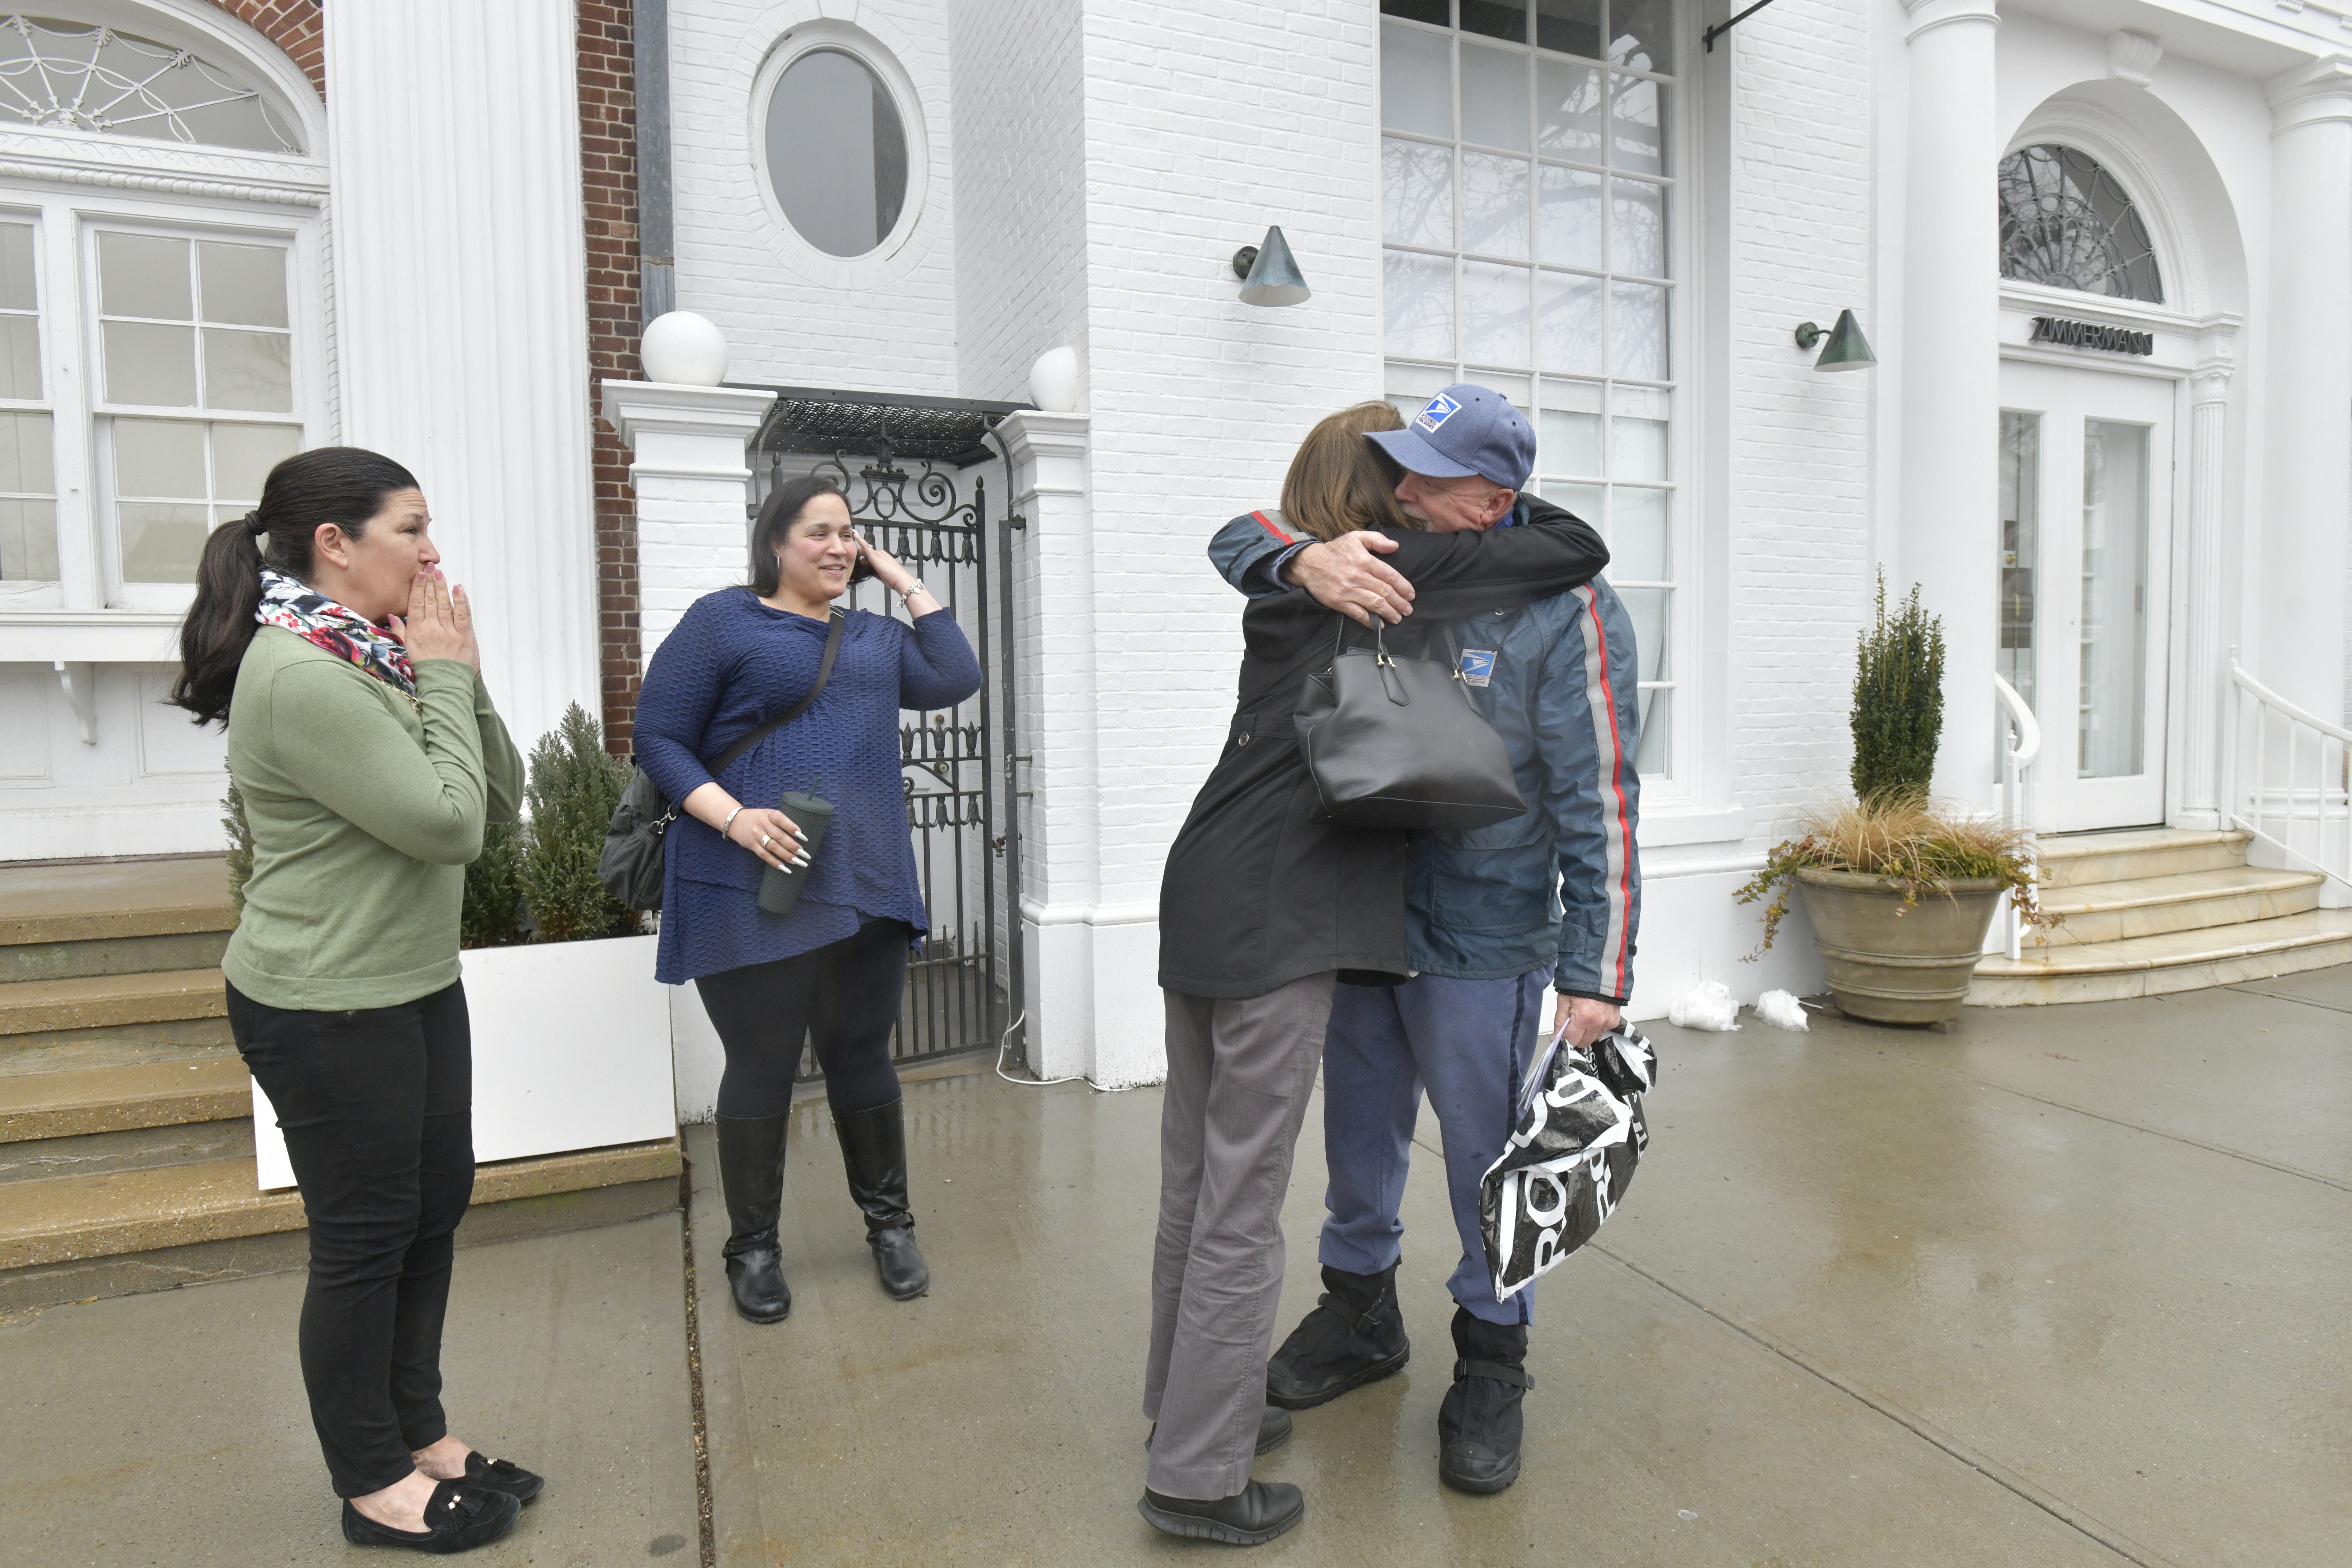 Jim Tuthill  gets a sendoff from Southampton Village employees on his route on his last day, February 28.  DANA SHAW